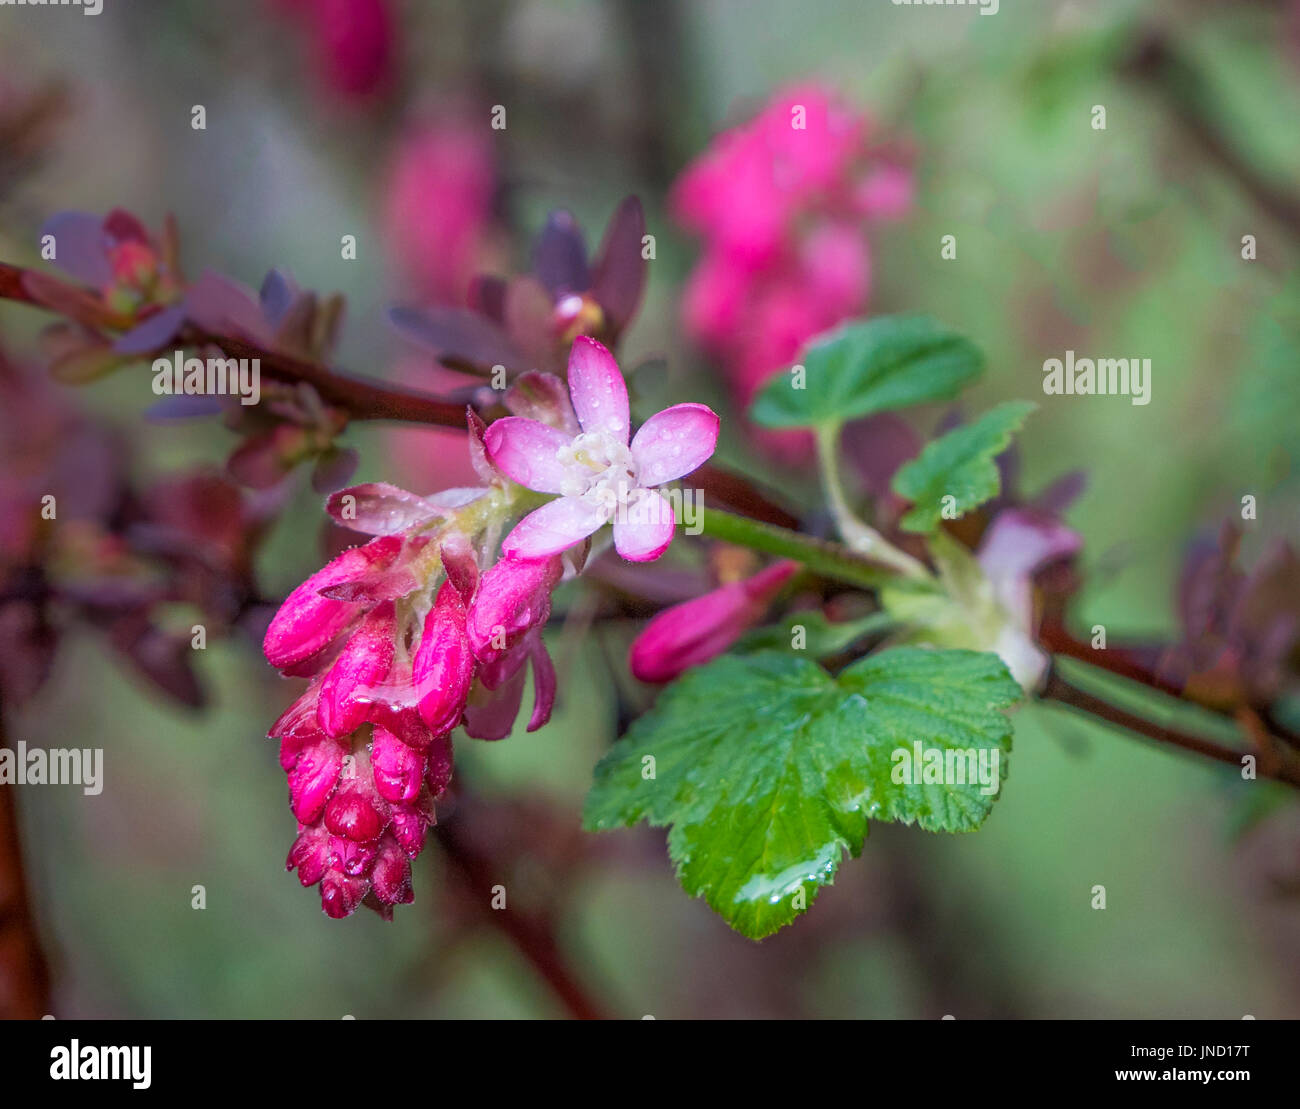 The buds of a Red Flowering Currant (Ribes sanguineum) begin to flower just after a rainfall. Stock Photo